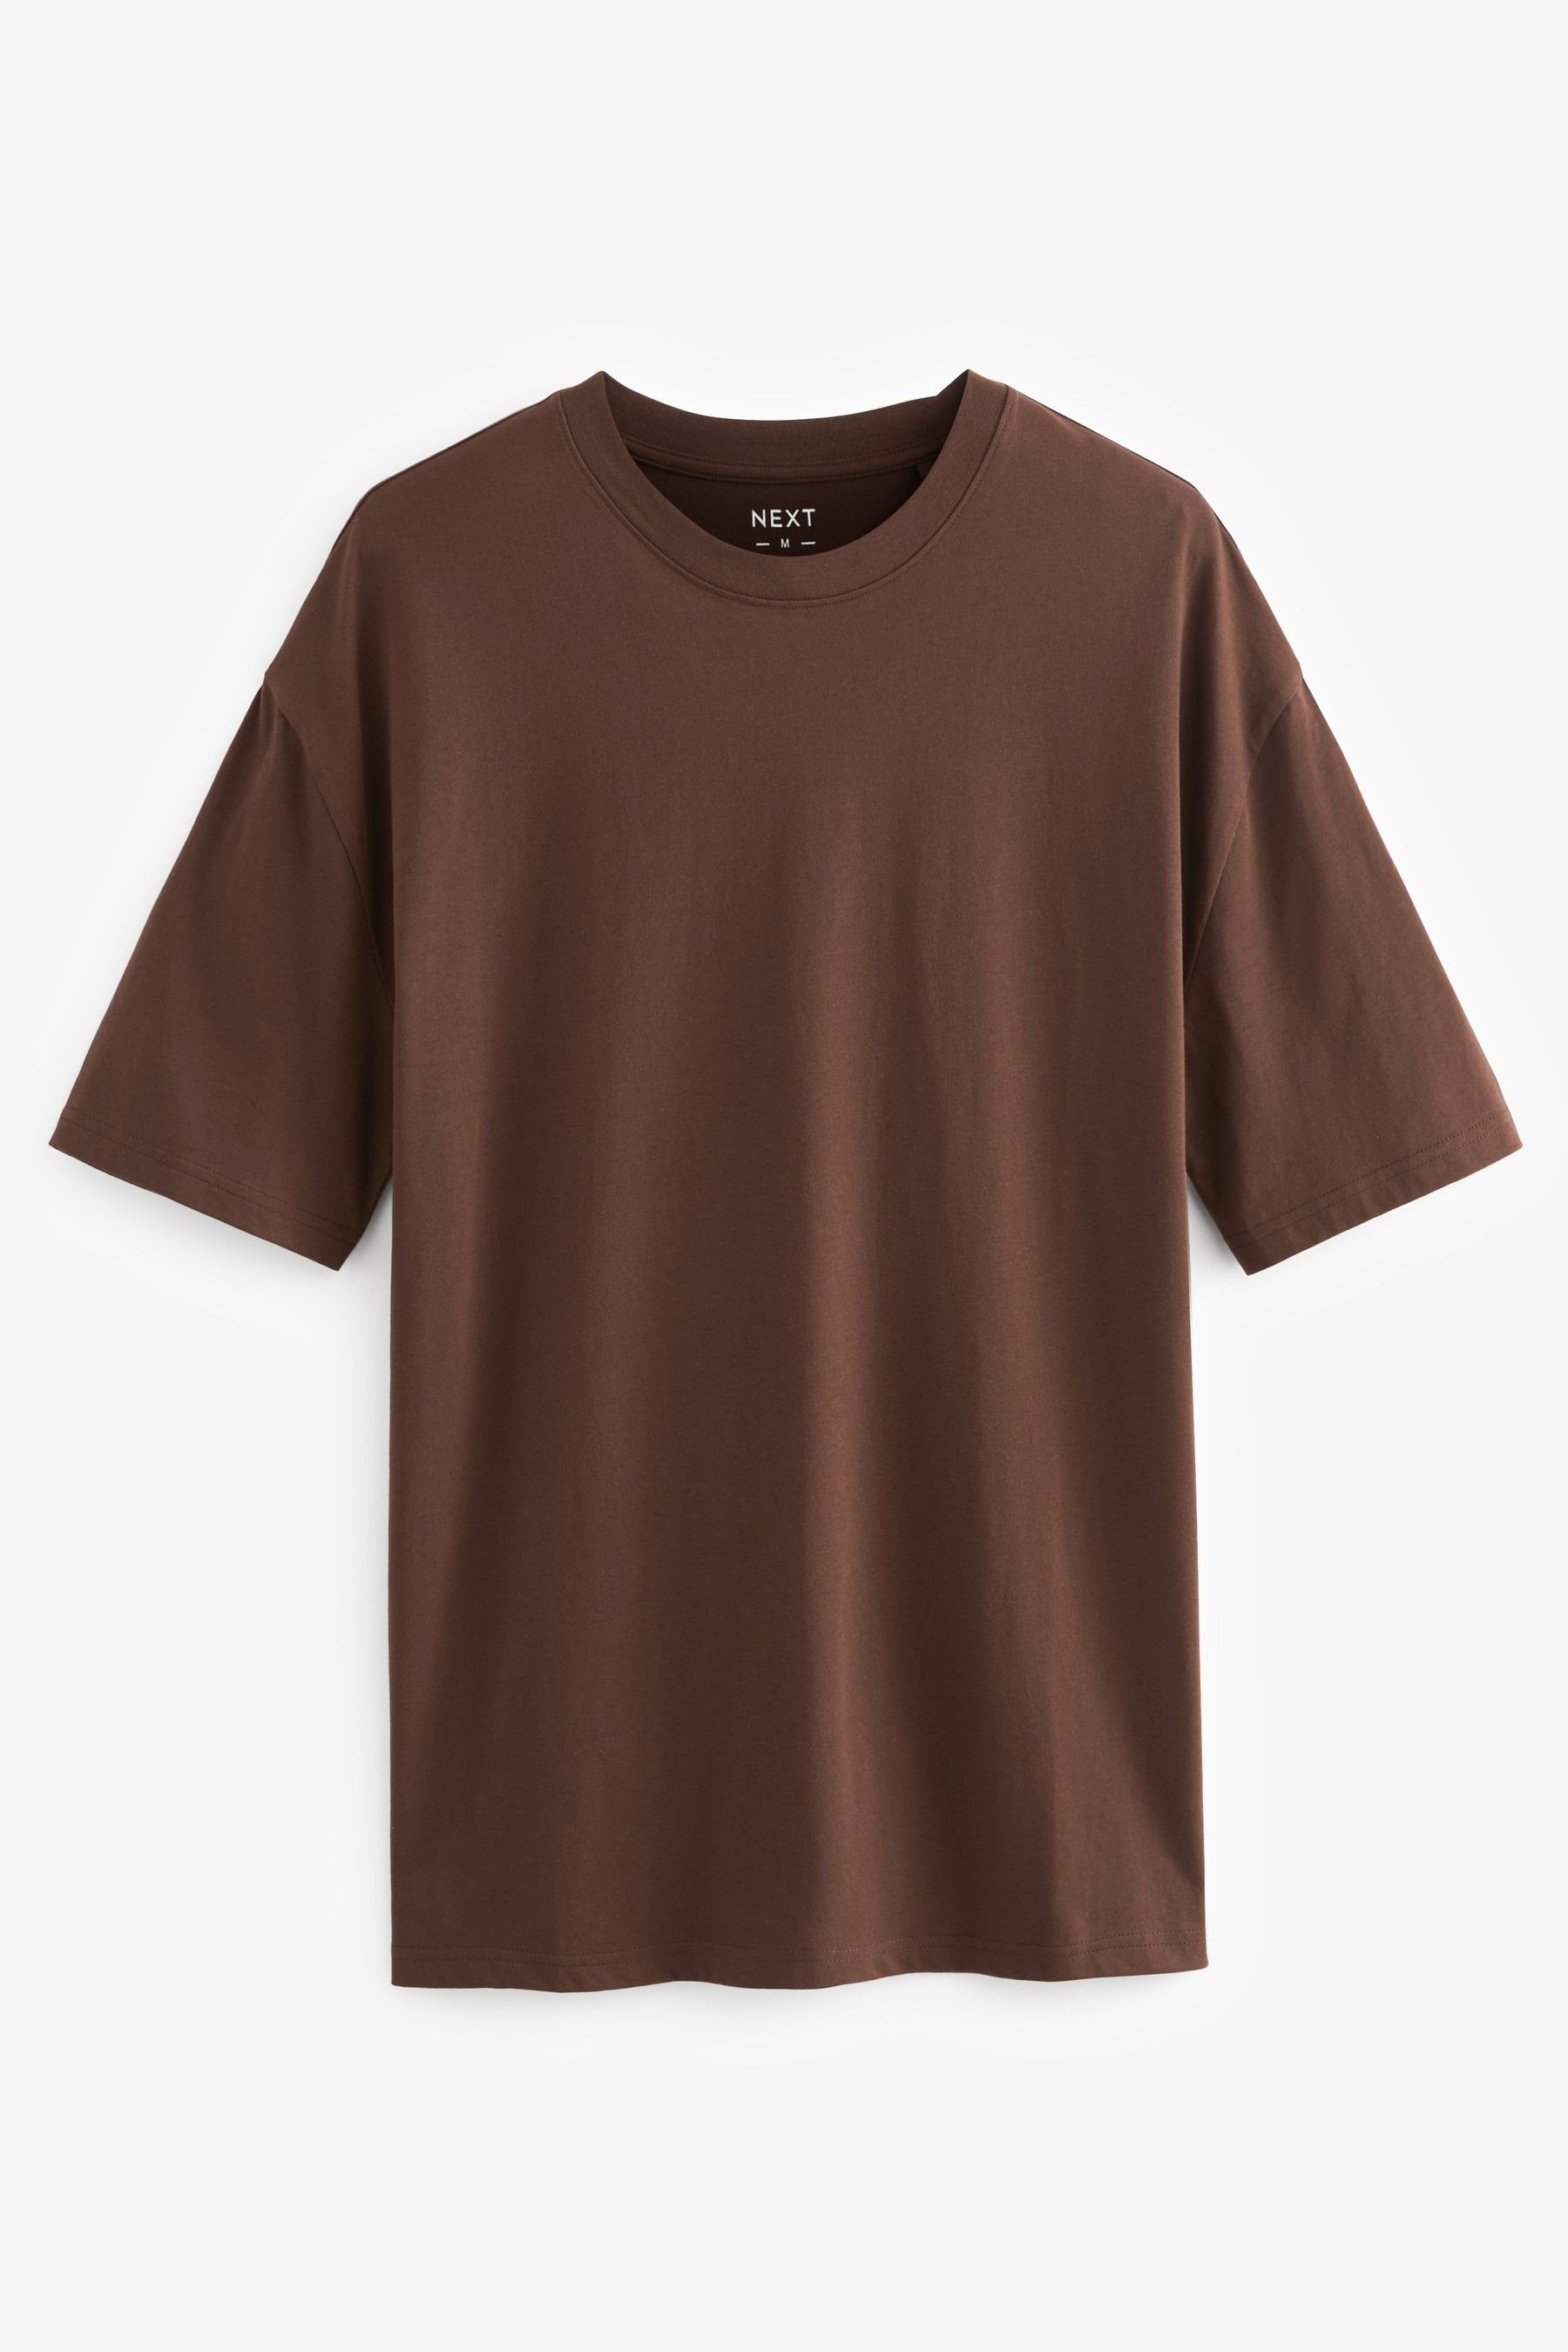 (1-tlg) Brown Fit im T-Shirt Next Relaxed Rundhals-T-Shirt Chocolate